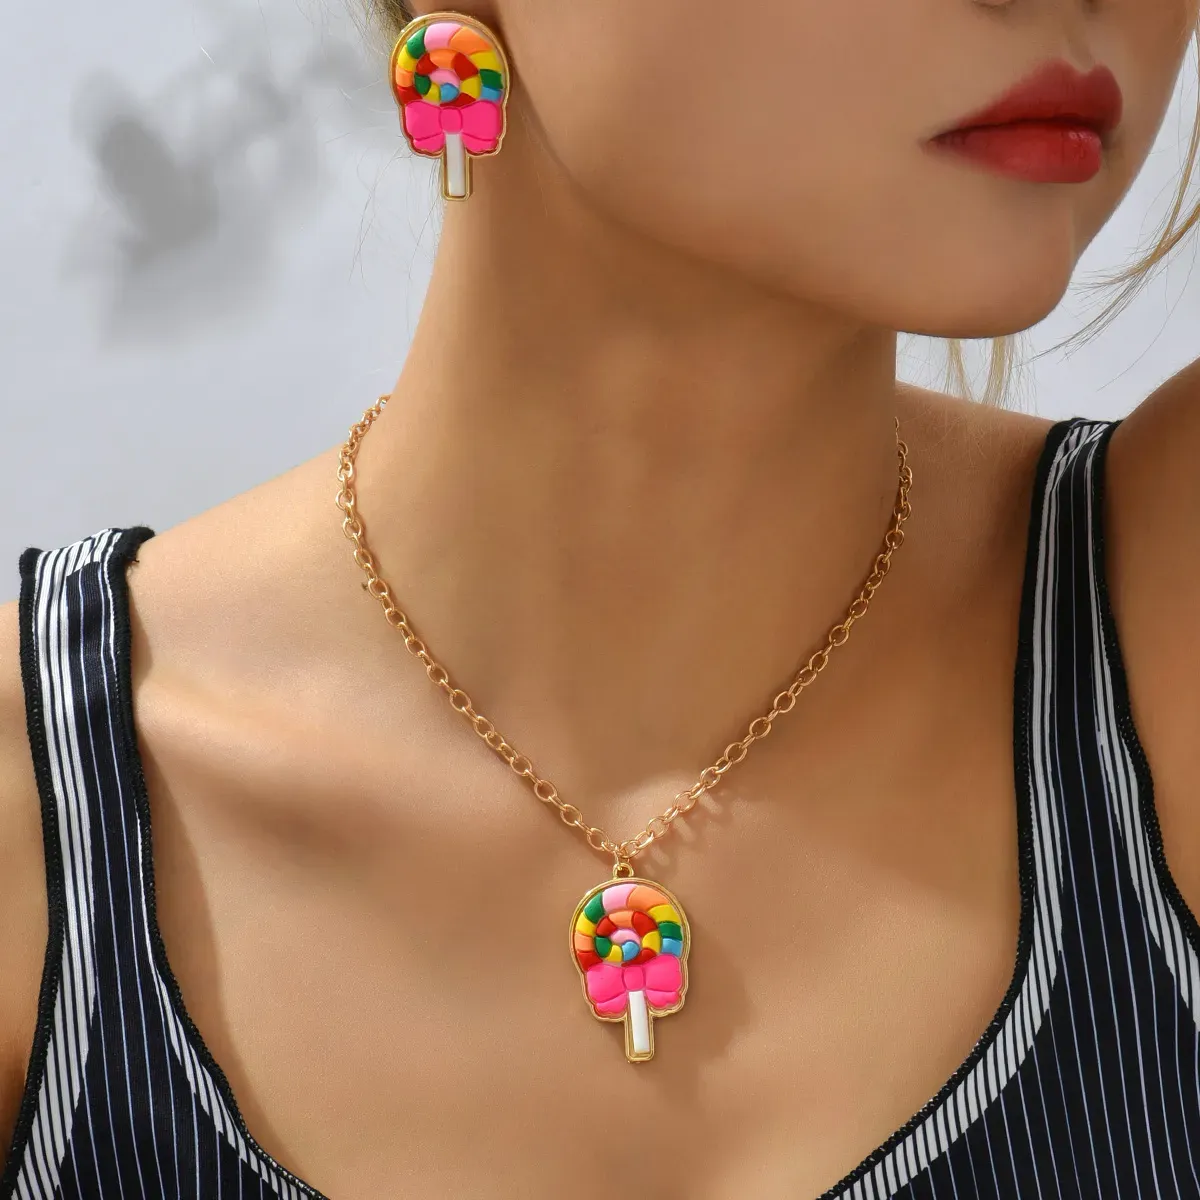 earring european and american hotselling candycolored lollipop earrings necklace jewelry set sweet and cute girly style collarbone chain